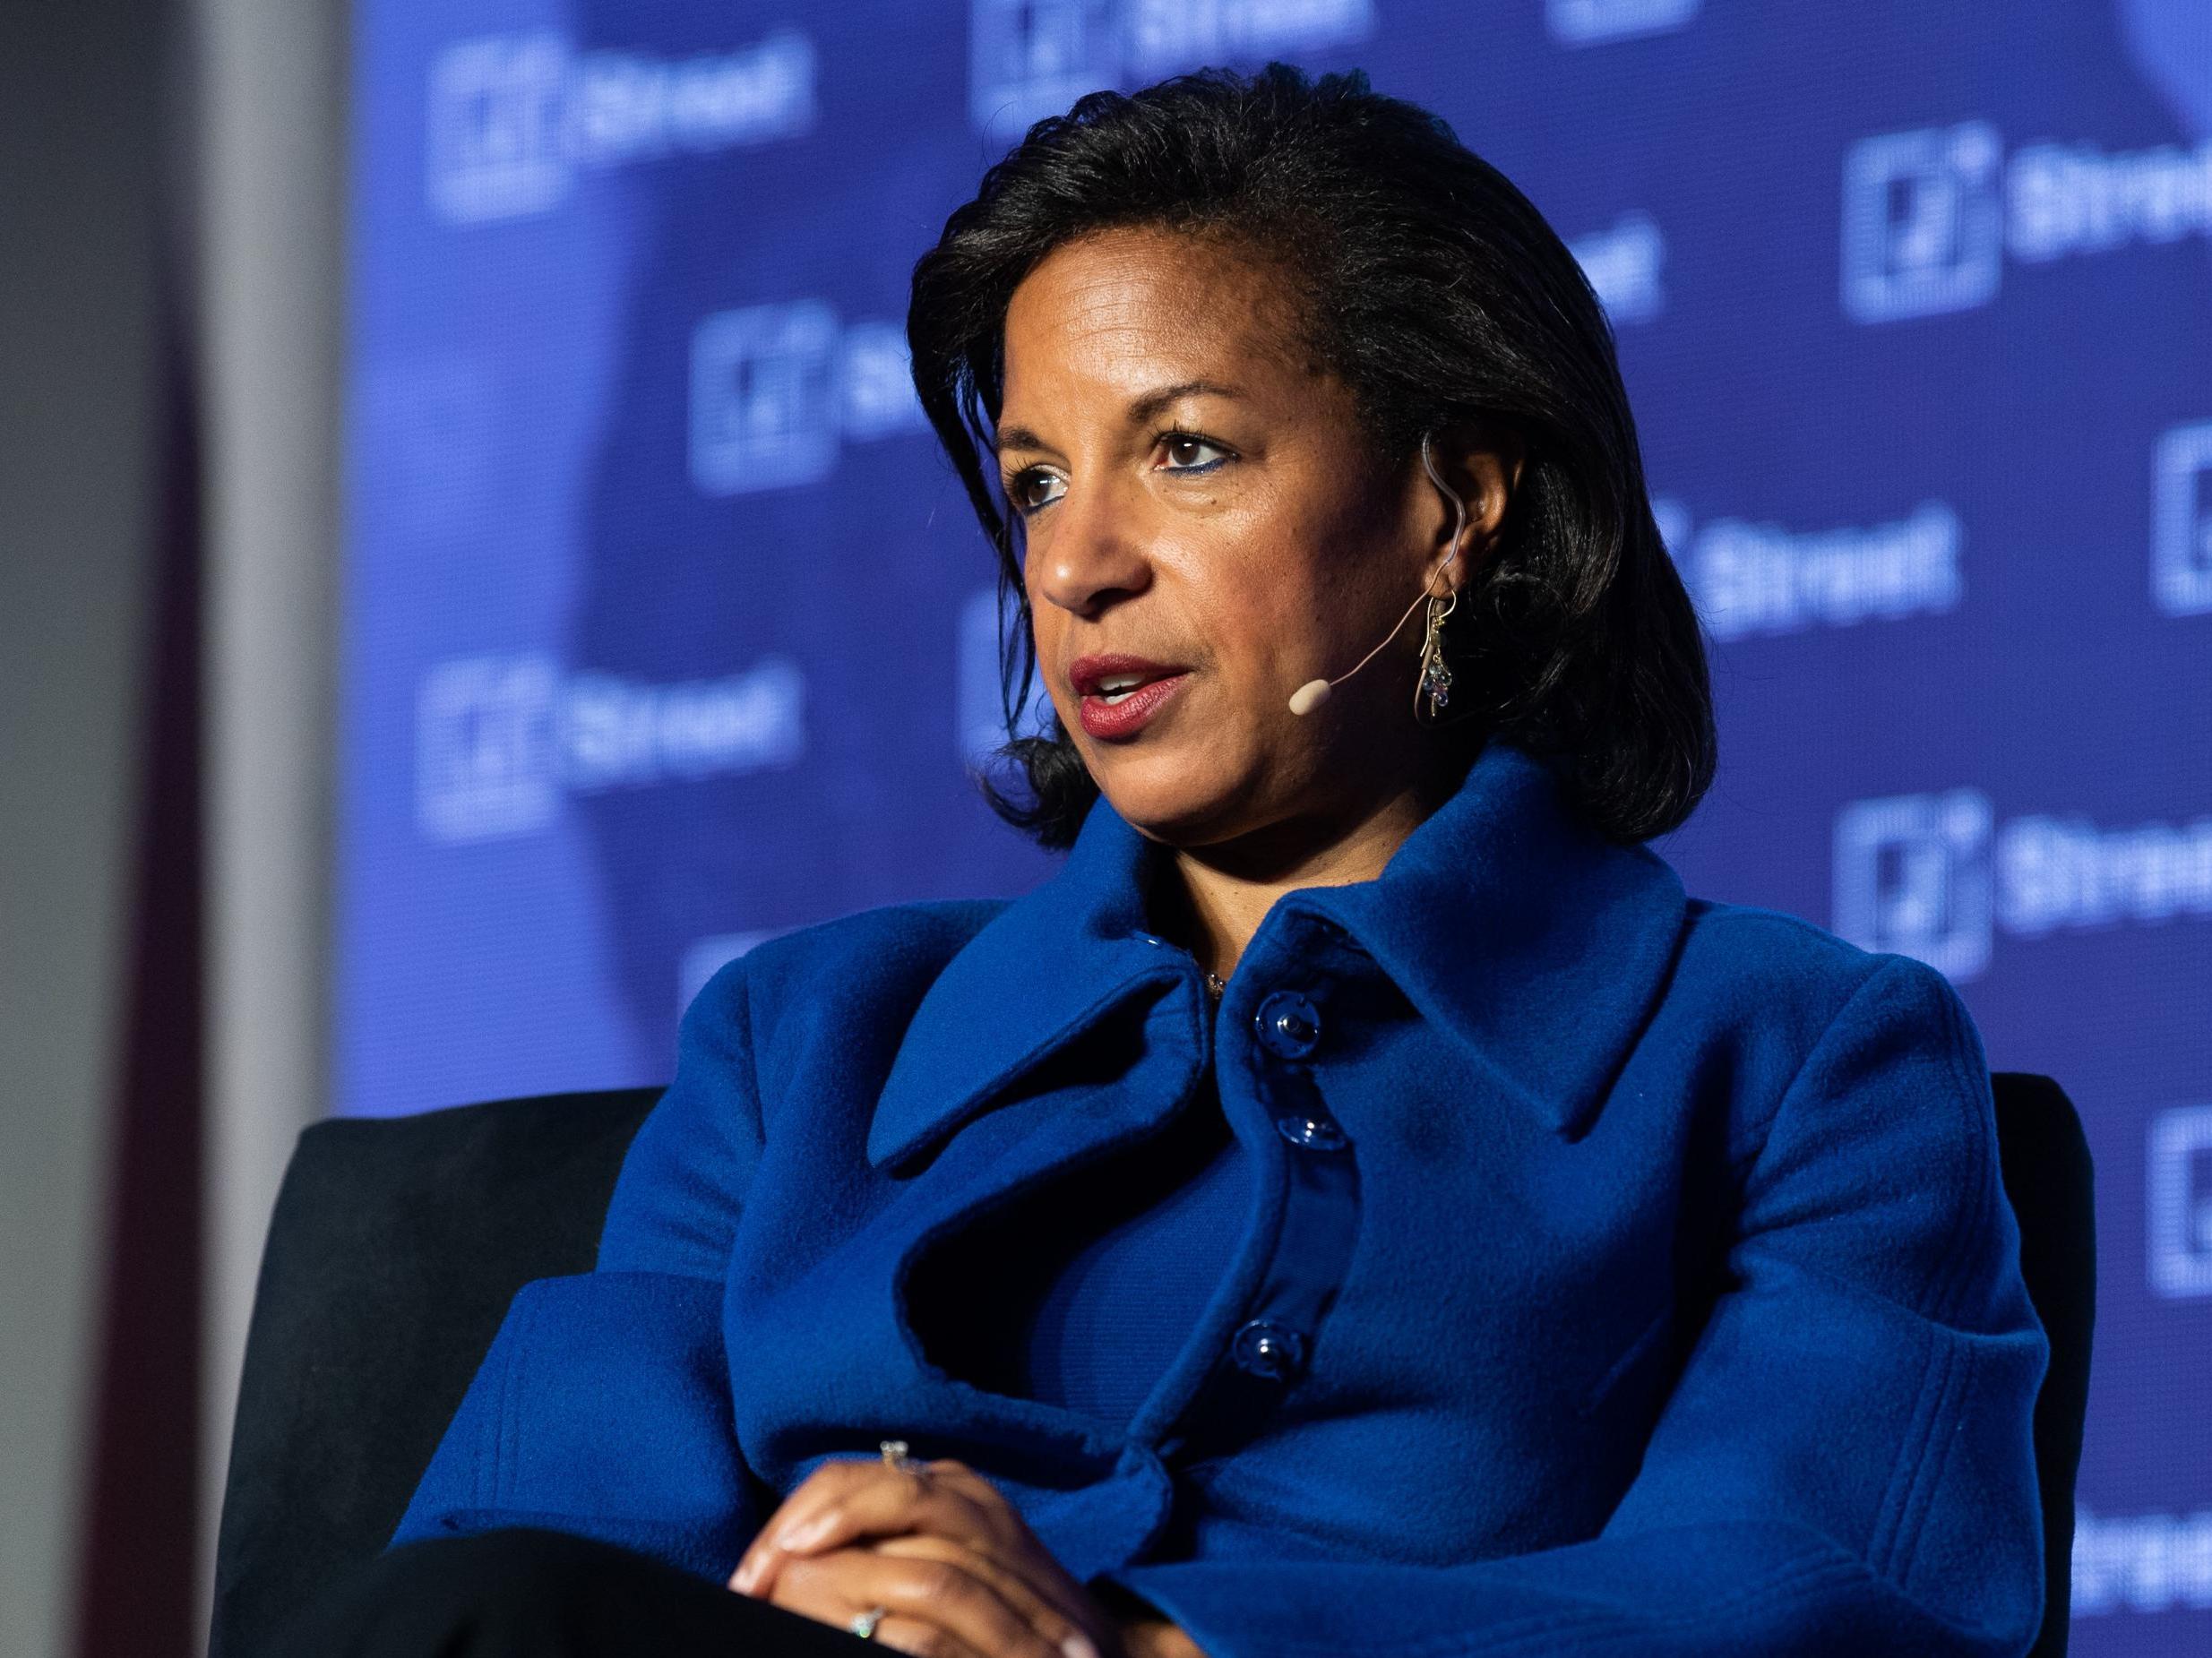 Susan Rice has extensive experience in foreign policy